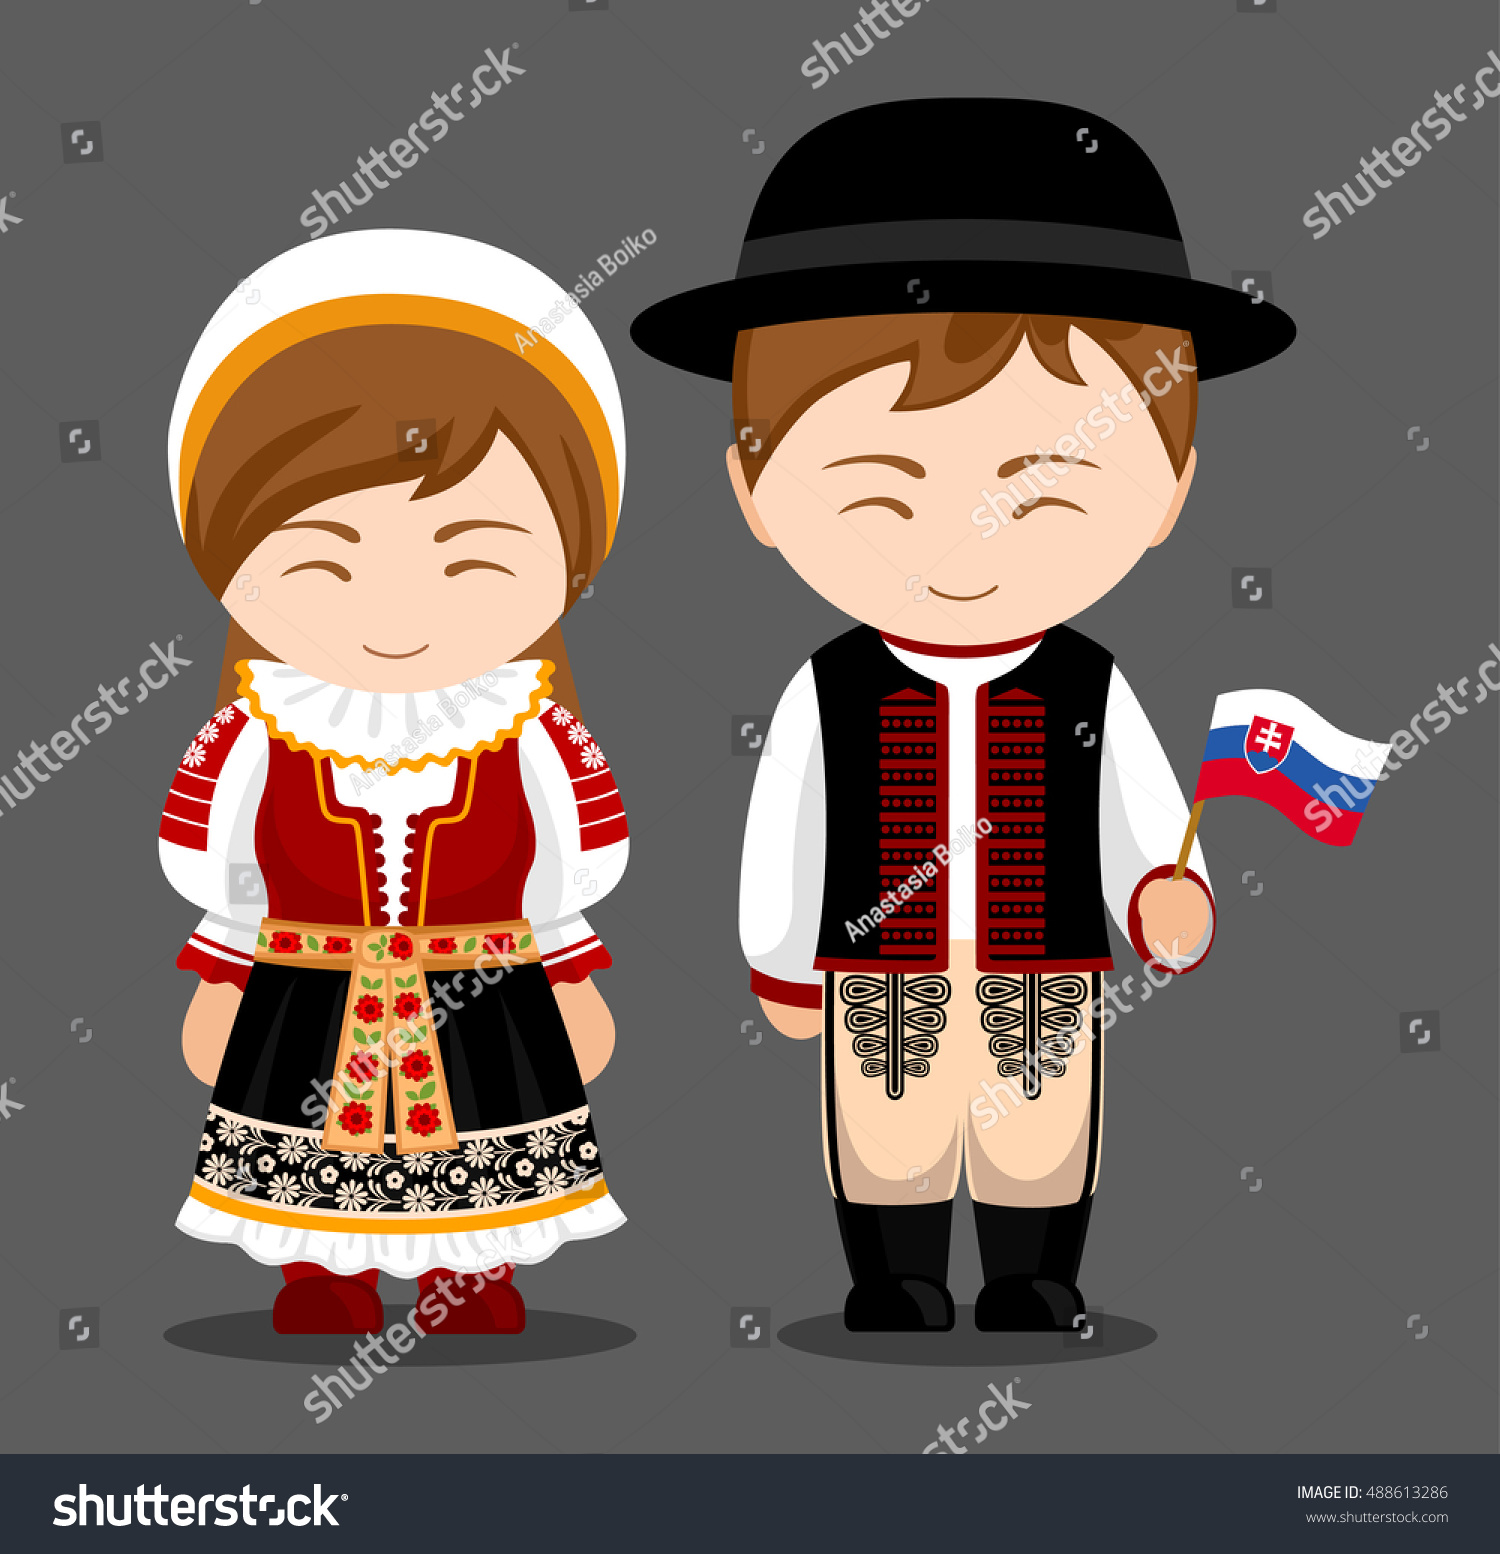 Slovaks in national dress with a flag. Man and - Royalty Free Stock ...